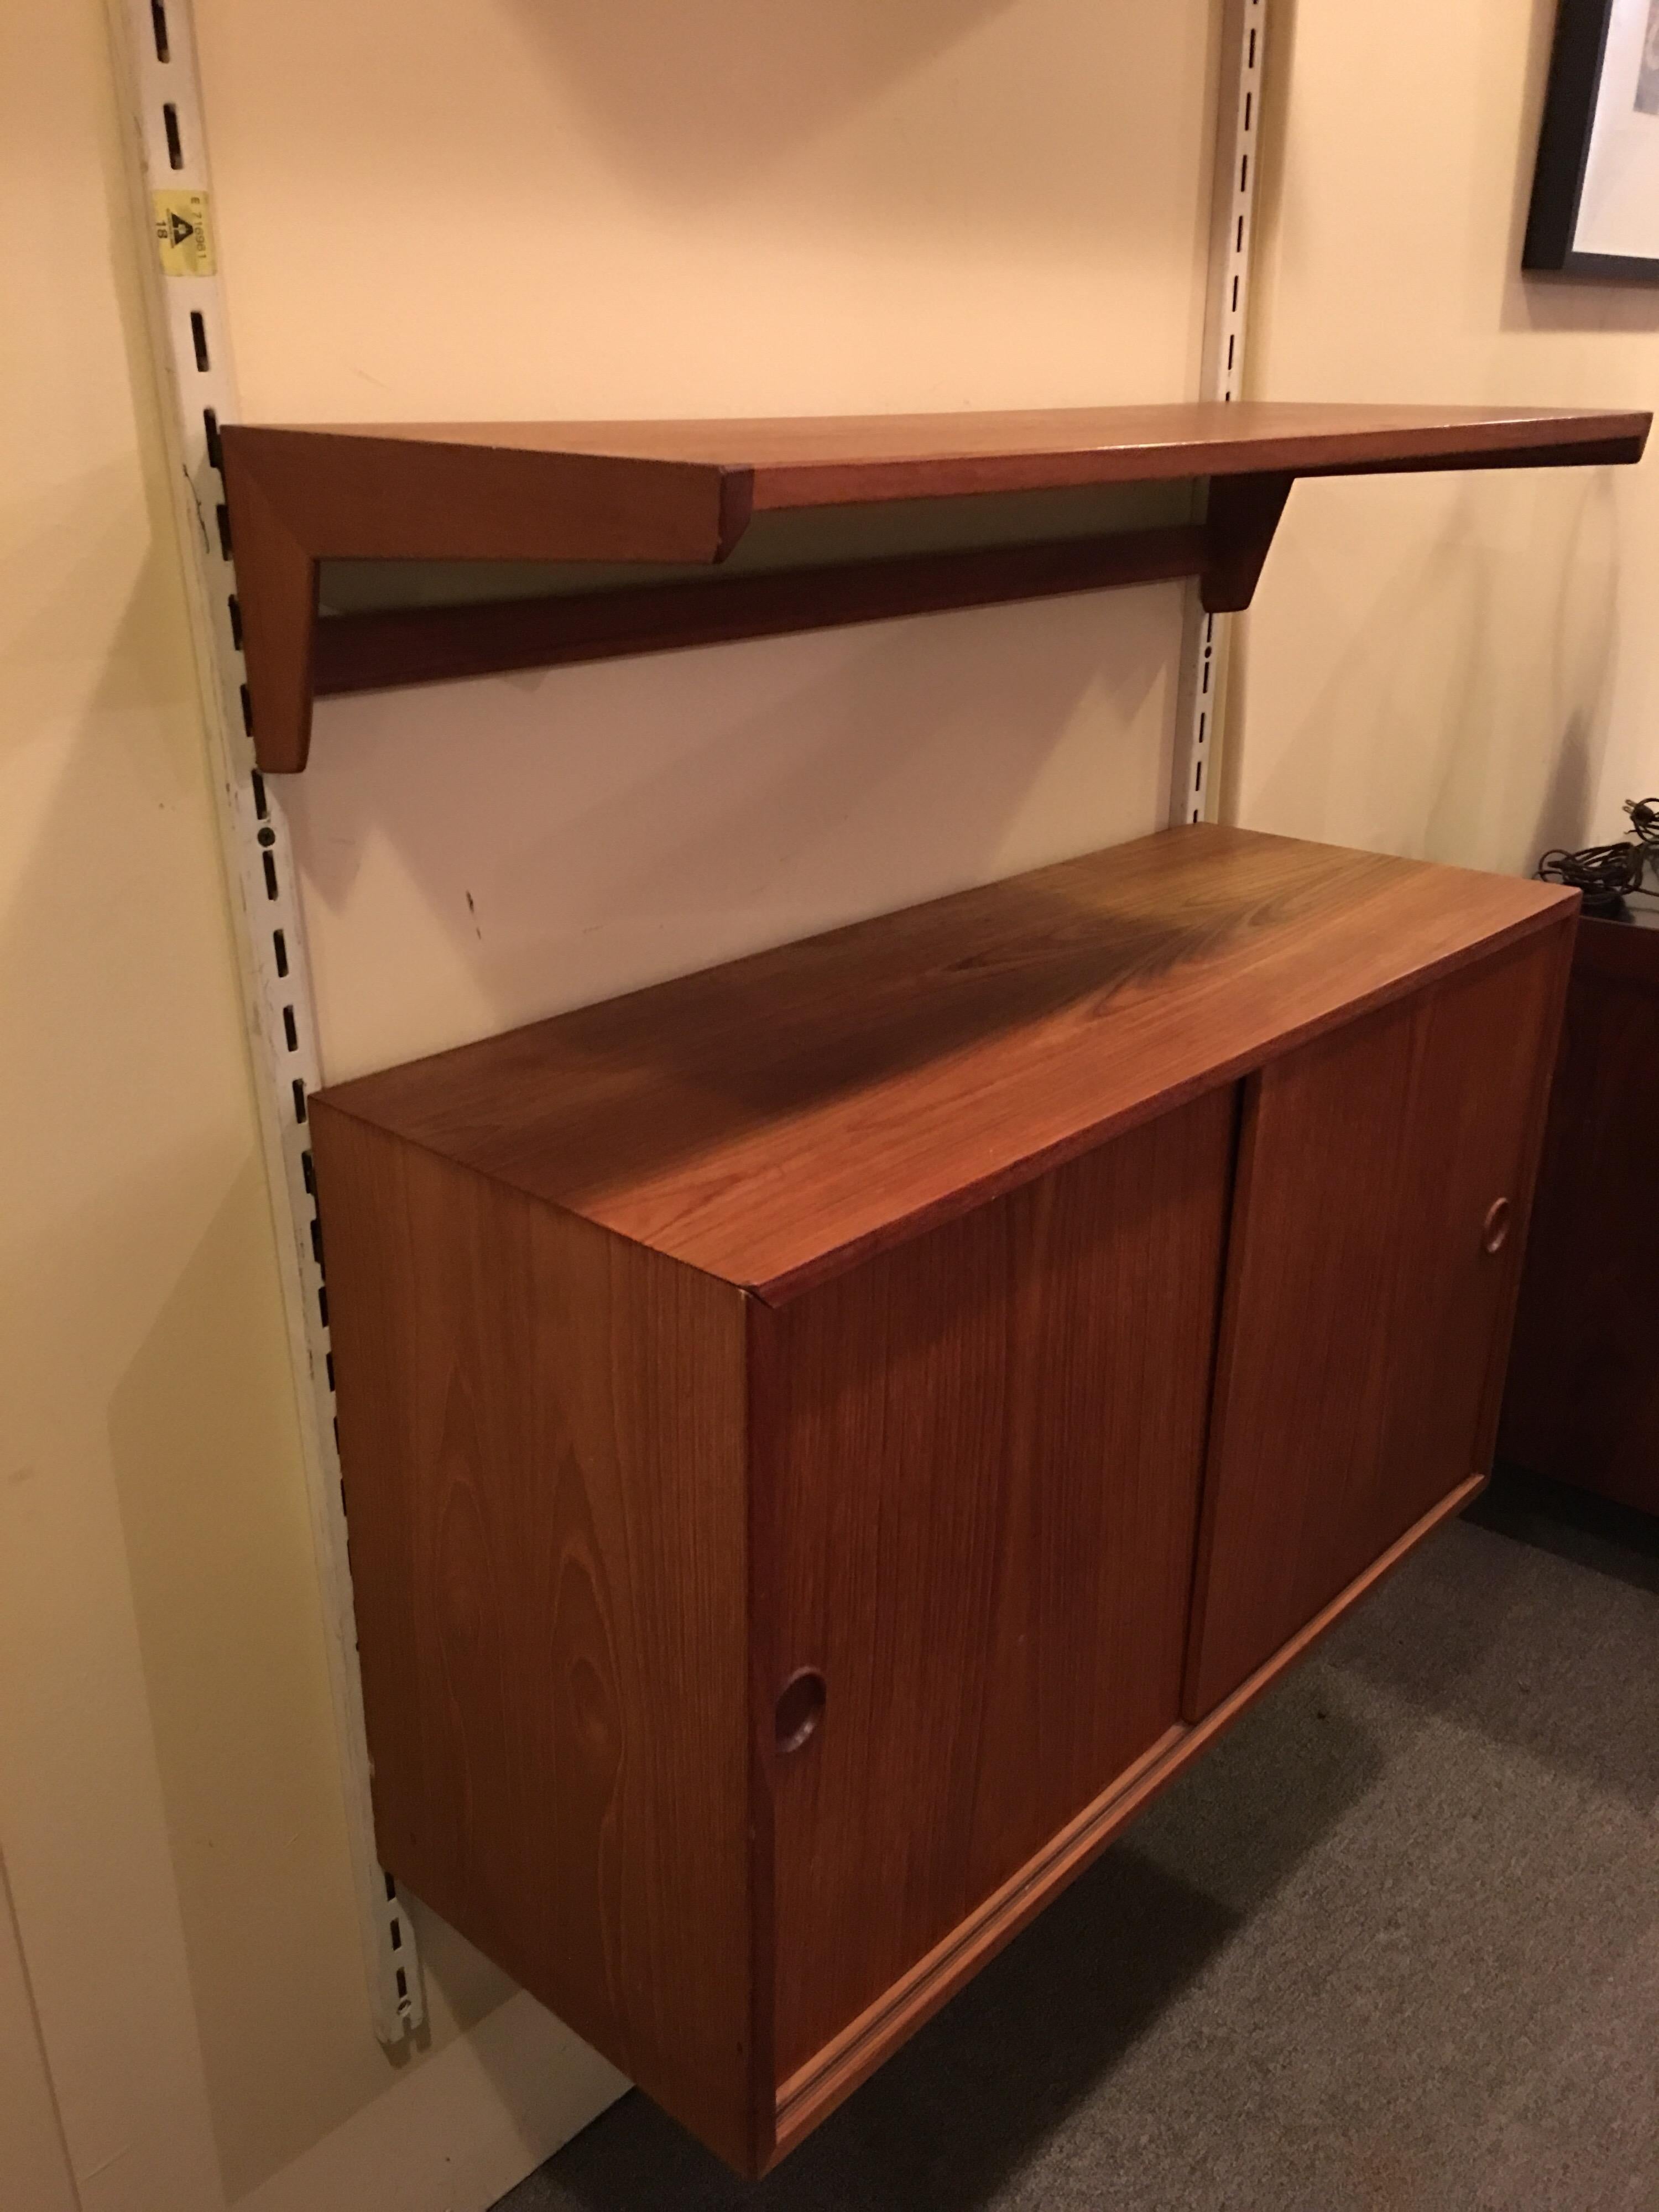 Danish teak adjustable shelving system with sliding door cabinet. Stamped Made In Denmark. Shelves and cabinet may be placed anywhere on the 69 inches of stanchion and they are 33.75 inches in width and 12.5 inches deep.